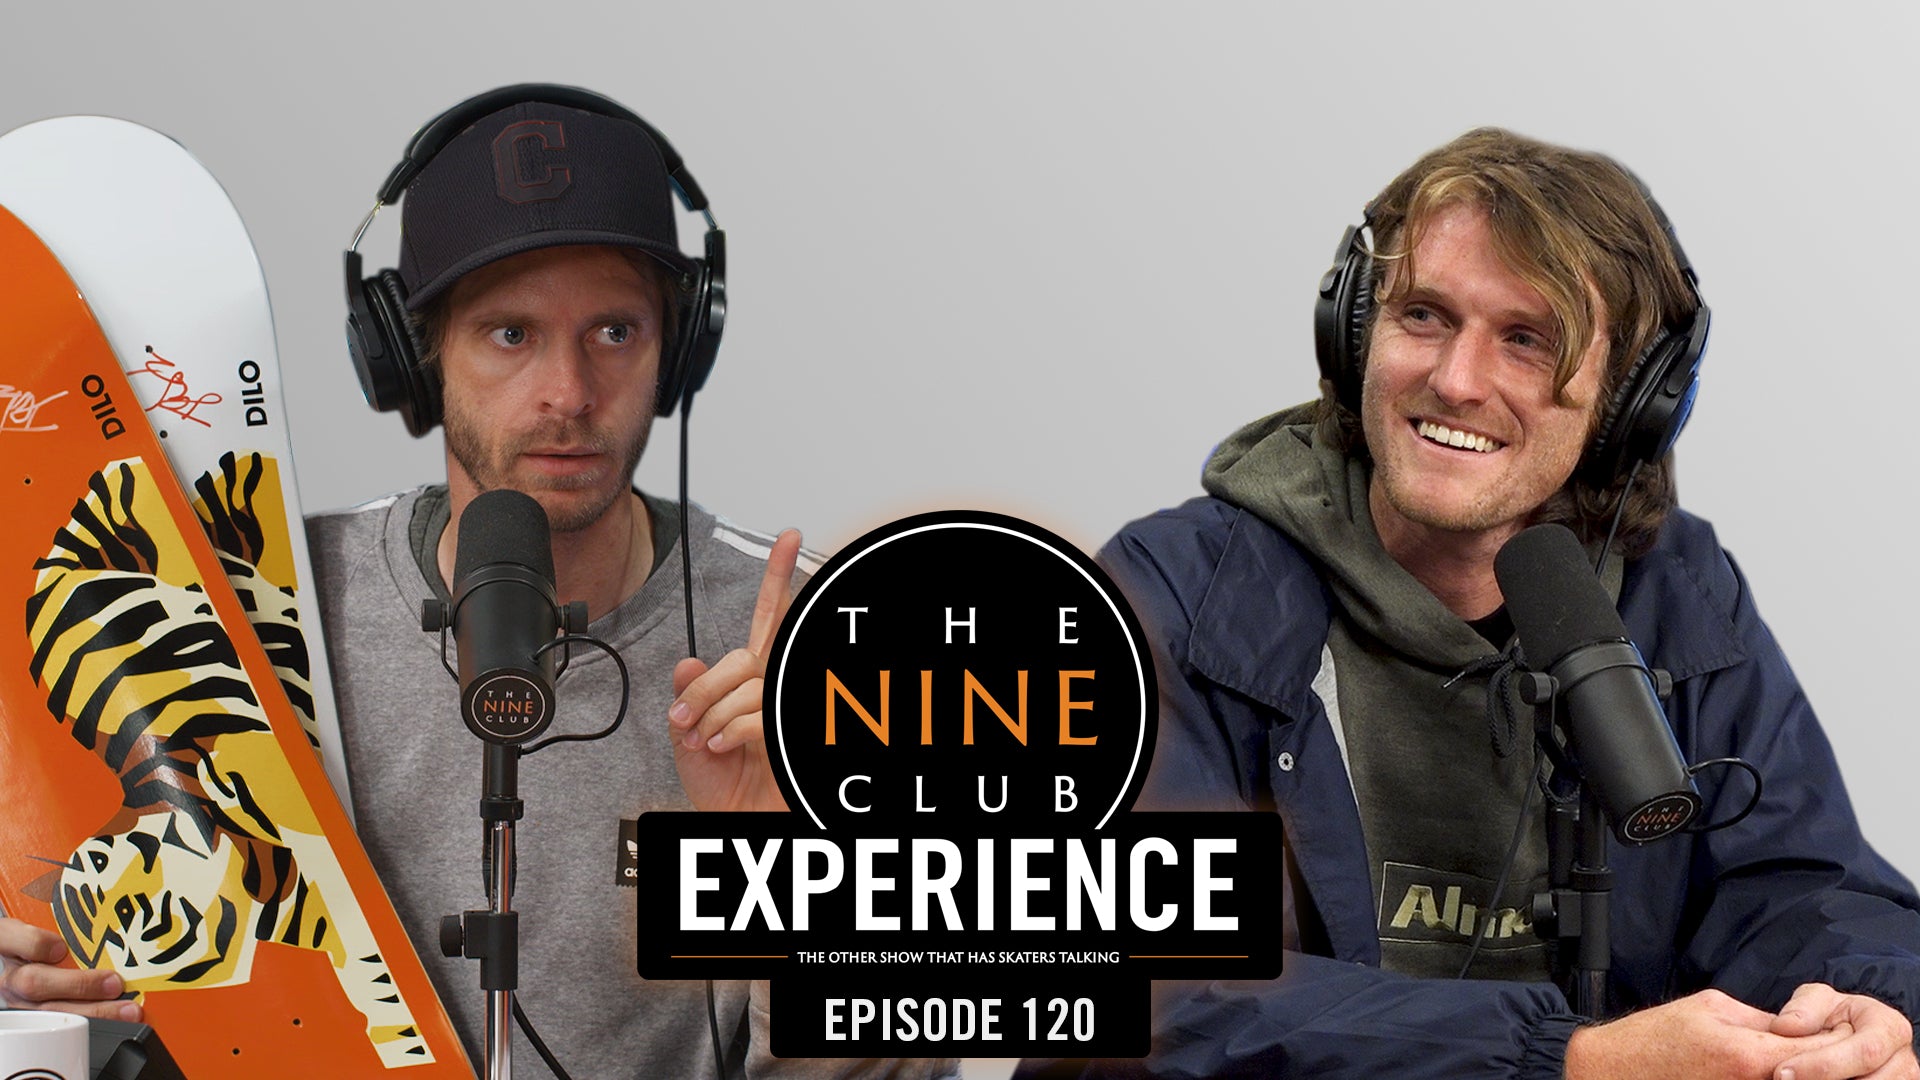 The Nine Club Experience Episode 120